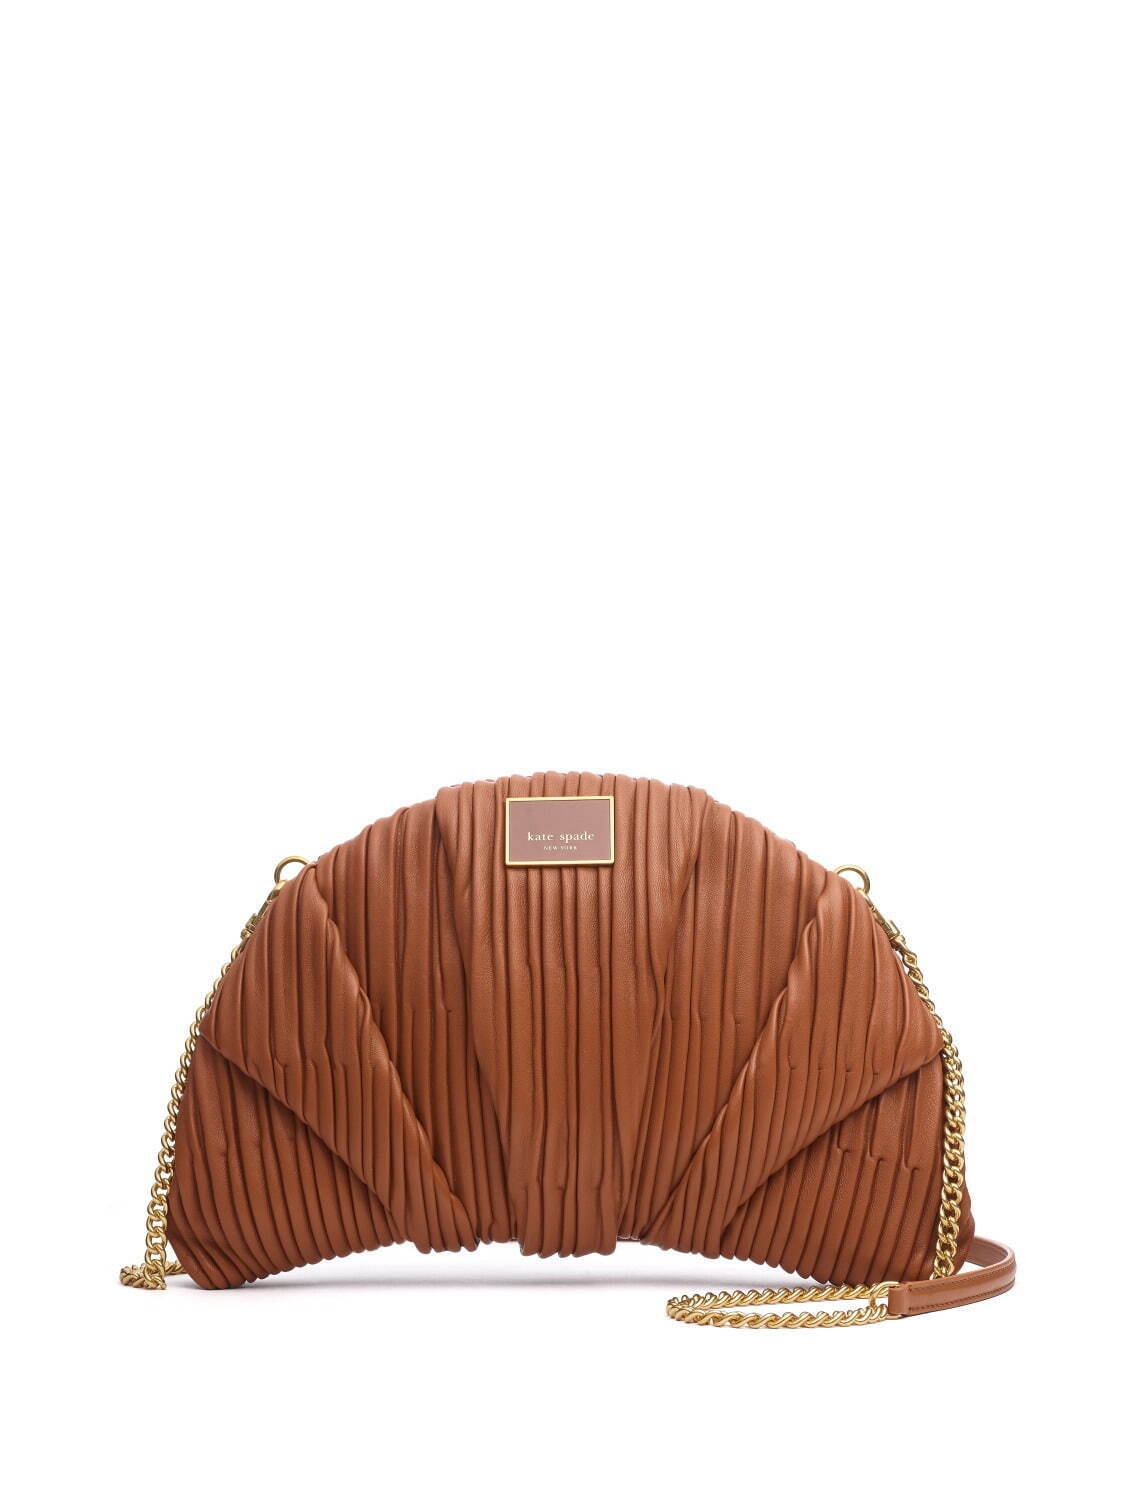 patisserie pleated smooth leather 3d croissant clutch 72,600円
※9月末発売予定